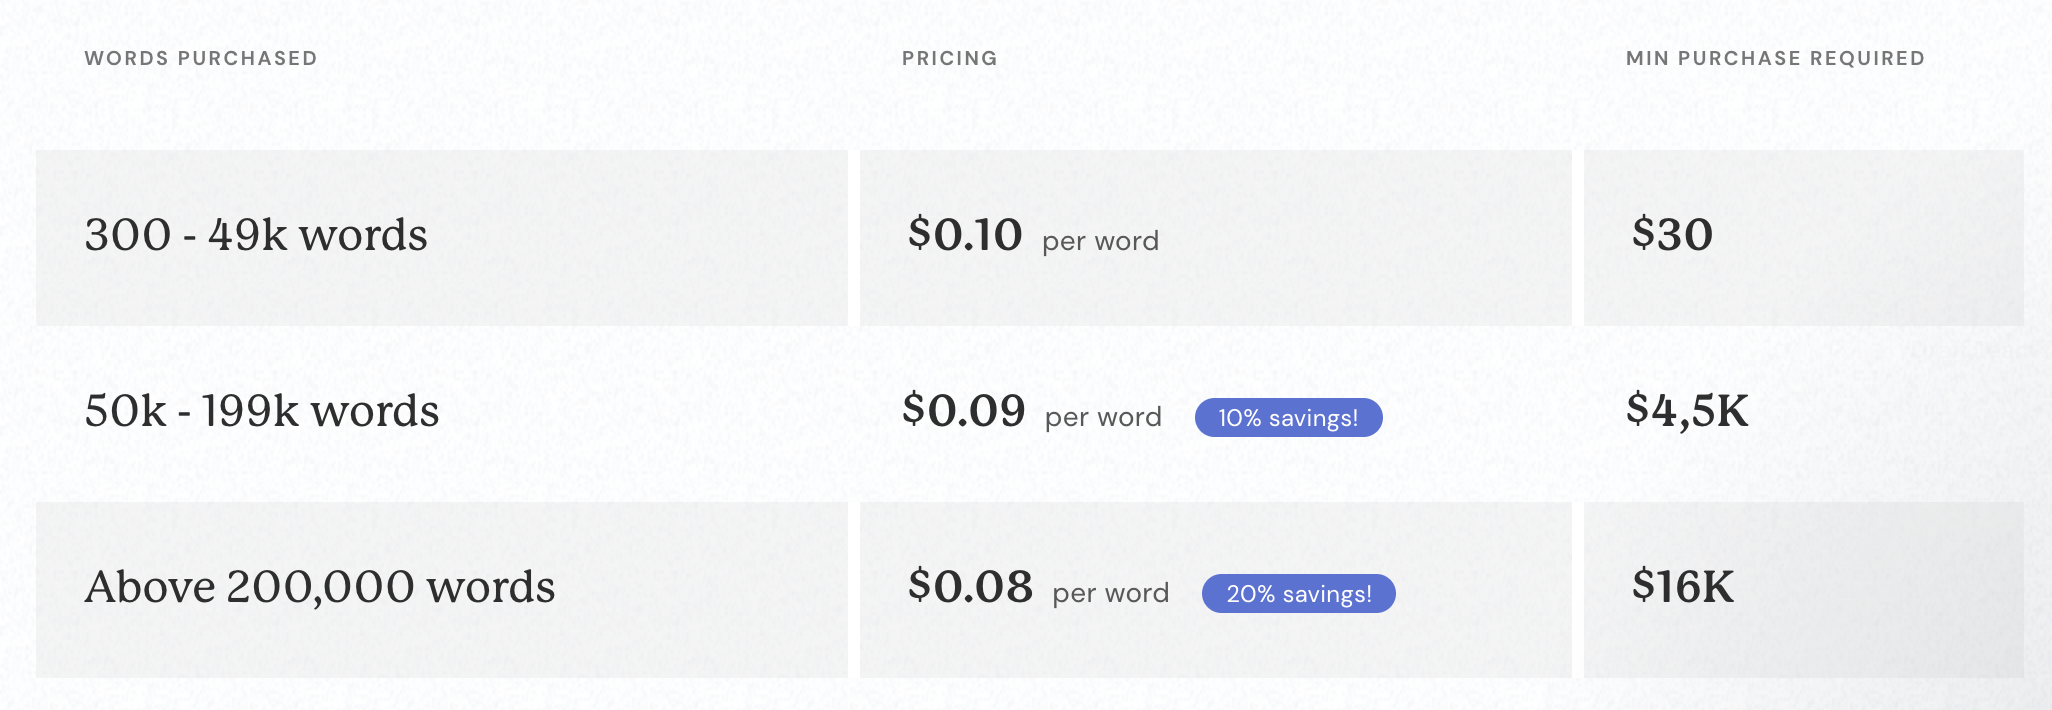 How do I purchase more words?